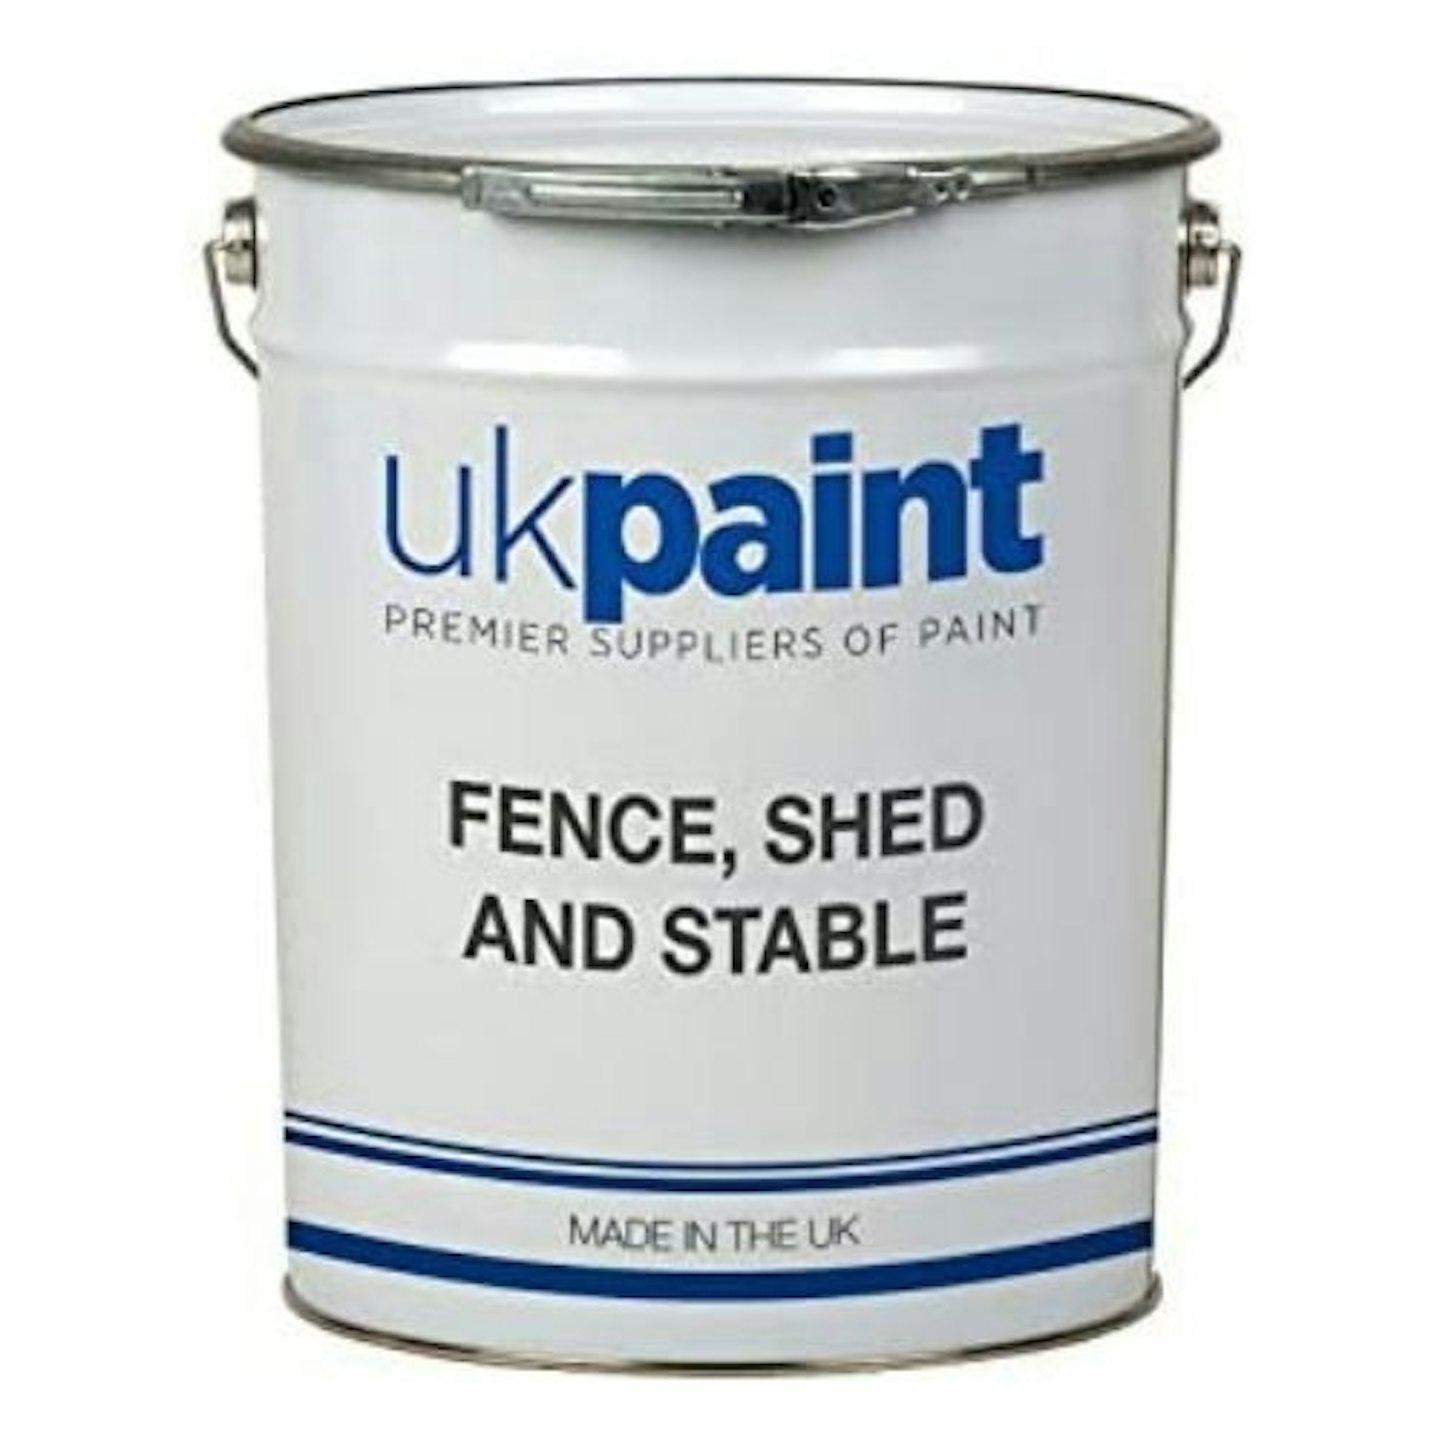 Water Based Shed and Fence Paint - Dark Grey - One Coat - 20 Litre